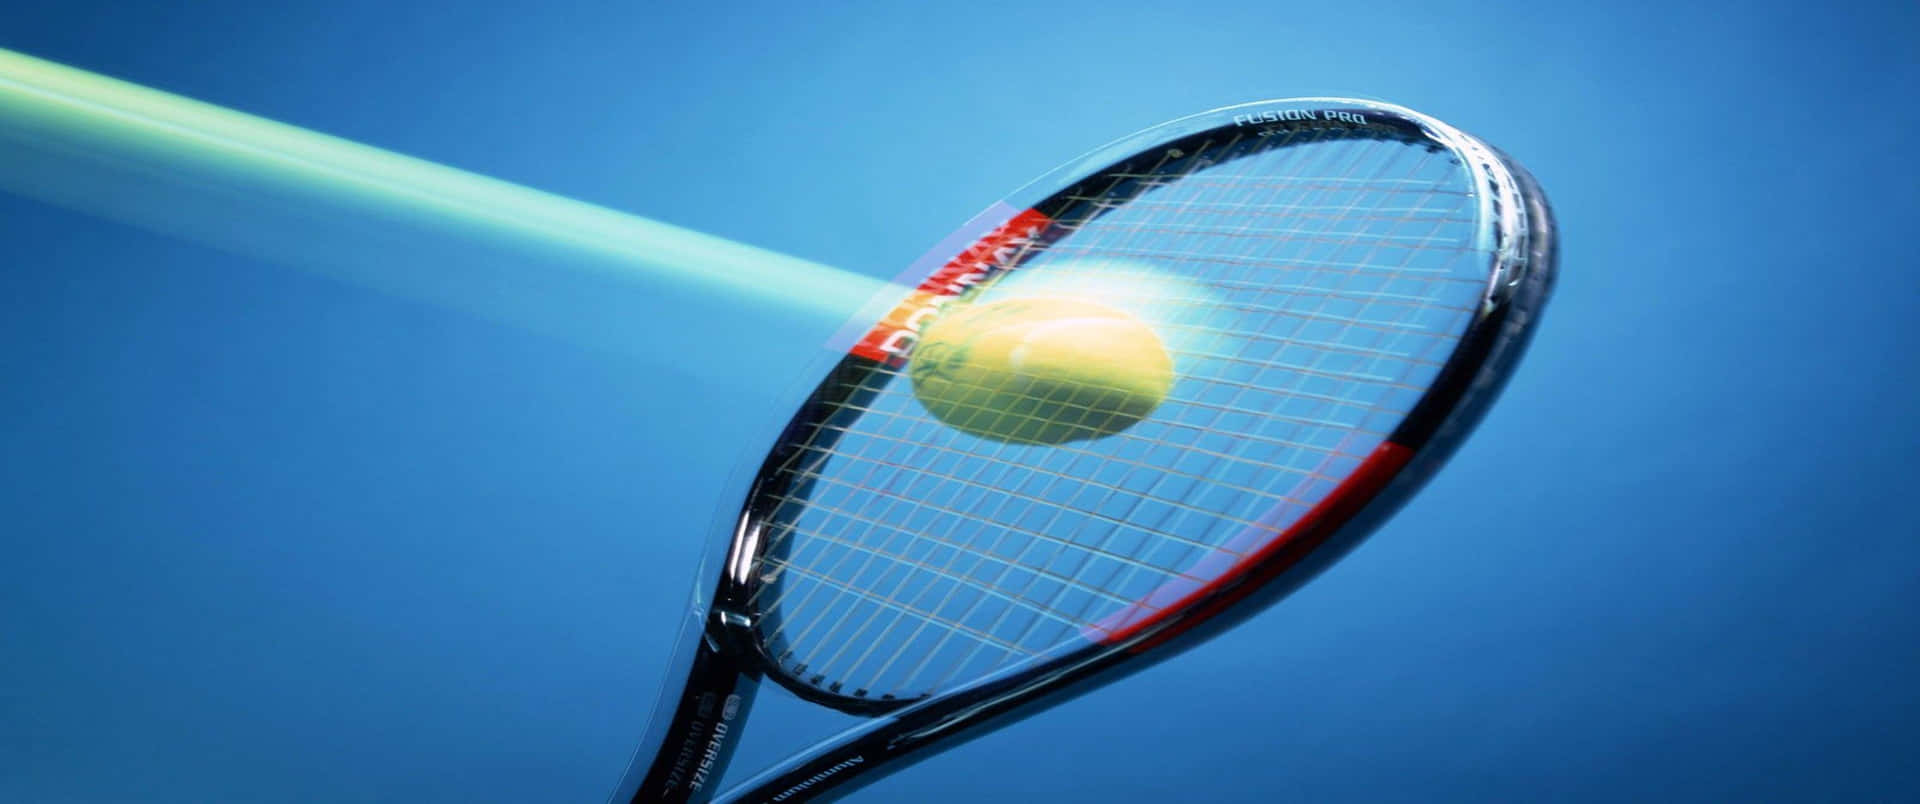 A Stunning High Definition 3440x1440p Tennis Background Image